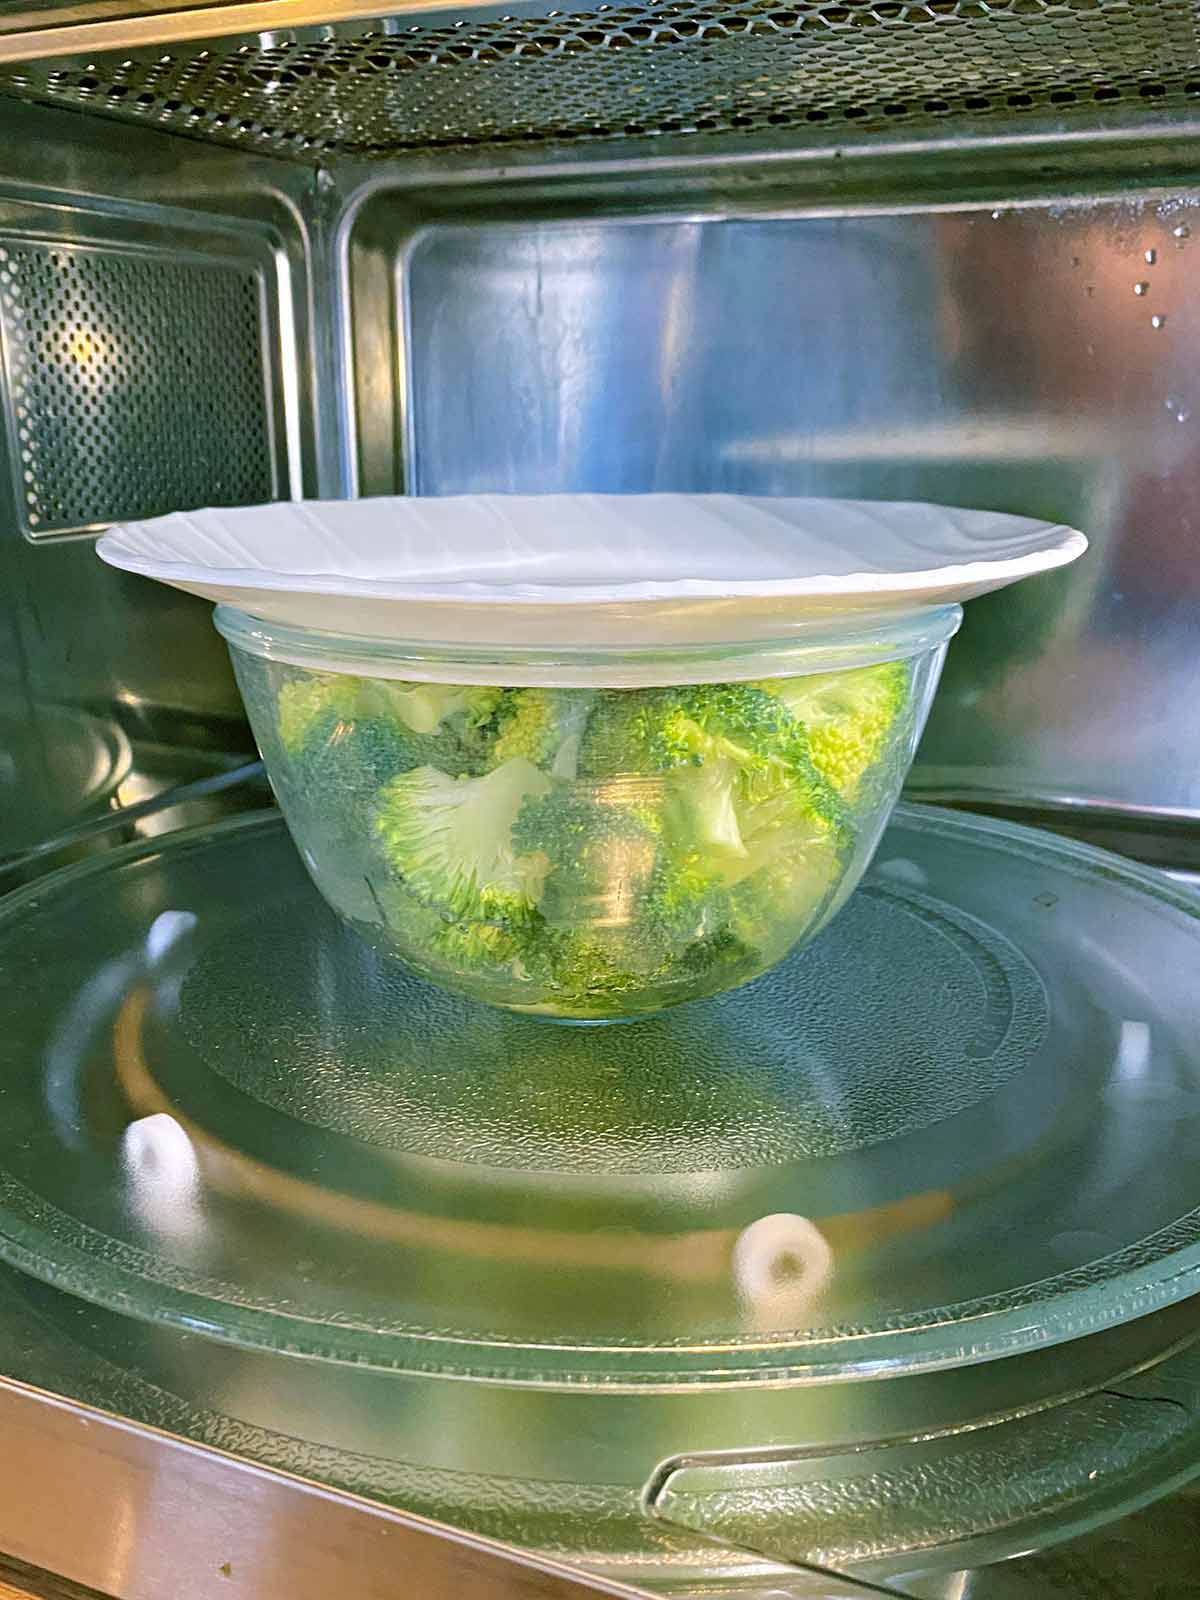 A bowl of broccoli covered with a plate in a microwave.